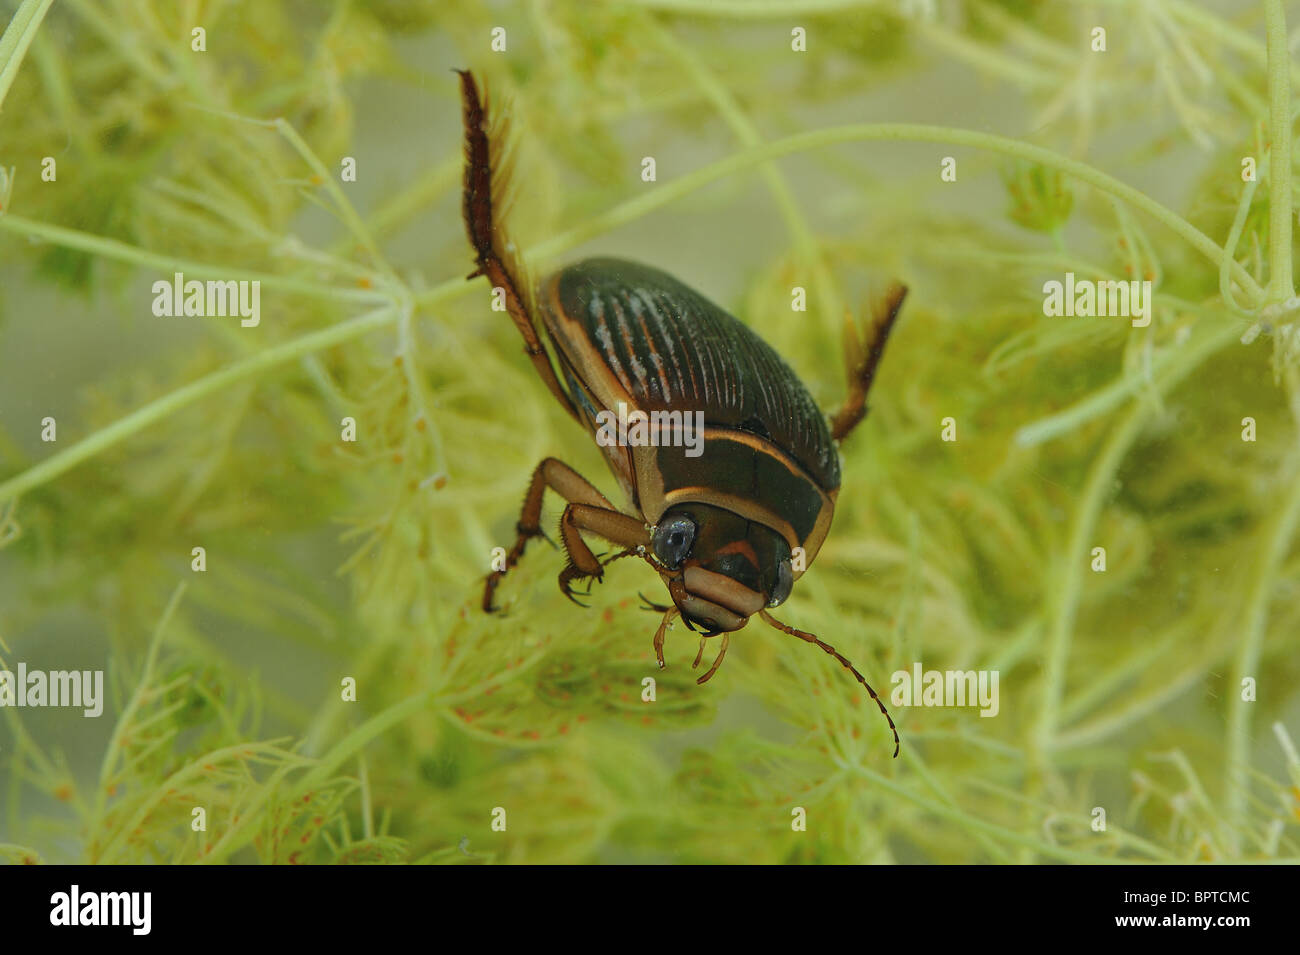 Great diving beetle - Water tiger (Dytiscus marginalis) - Female - Vaucluse - Provence - France Stock Photo